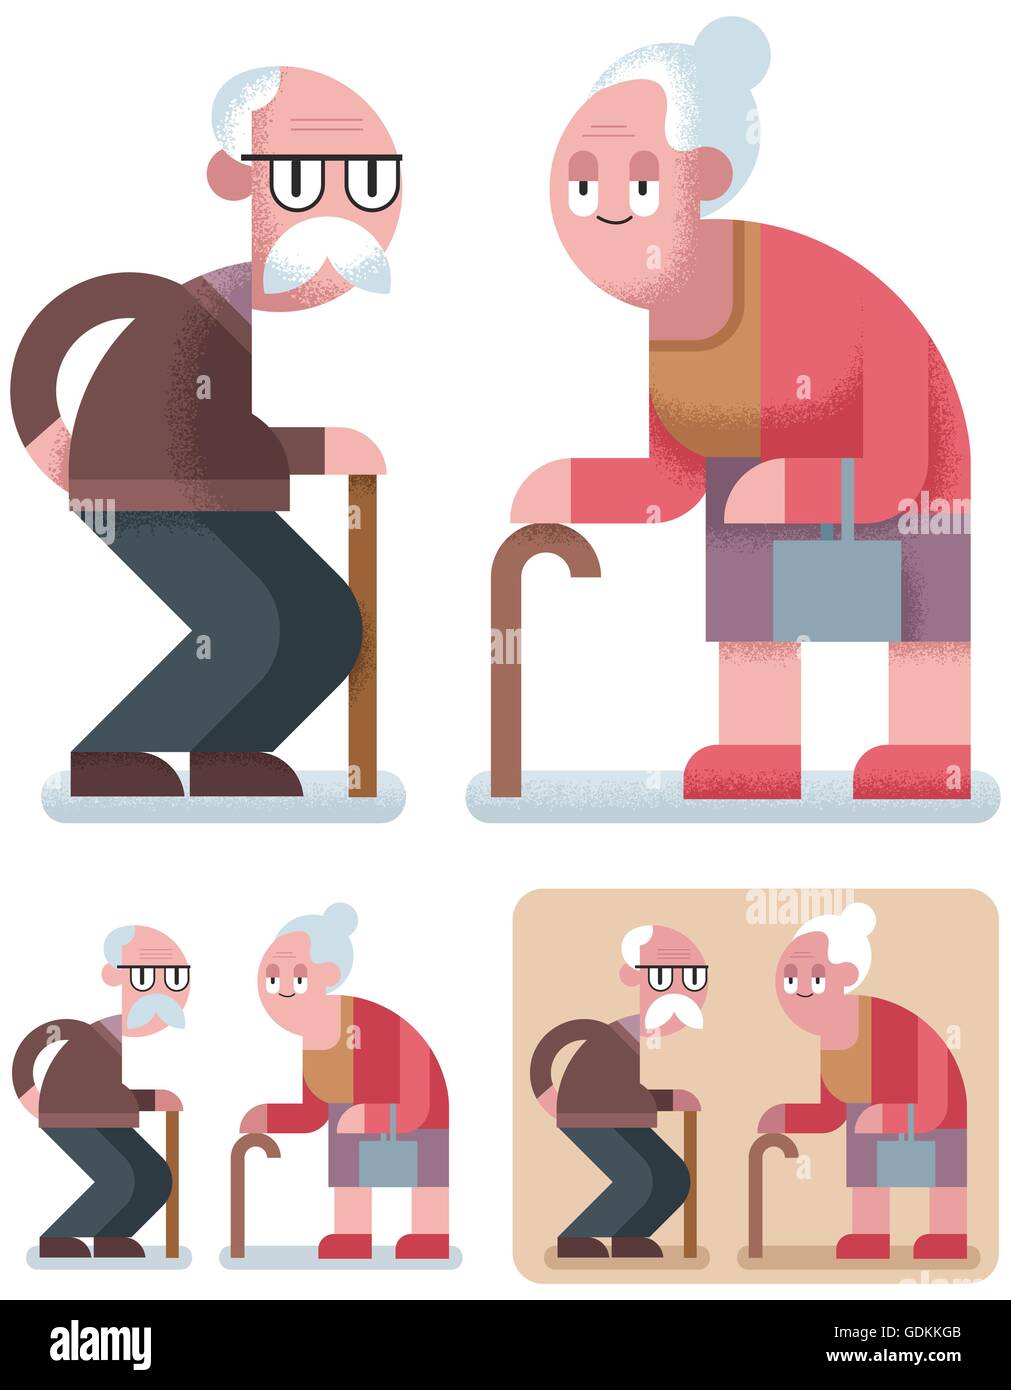 Flat design illustration of elderly couple in 3 color versions. Stock Vector